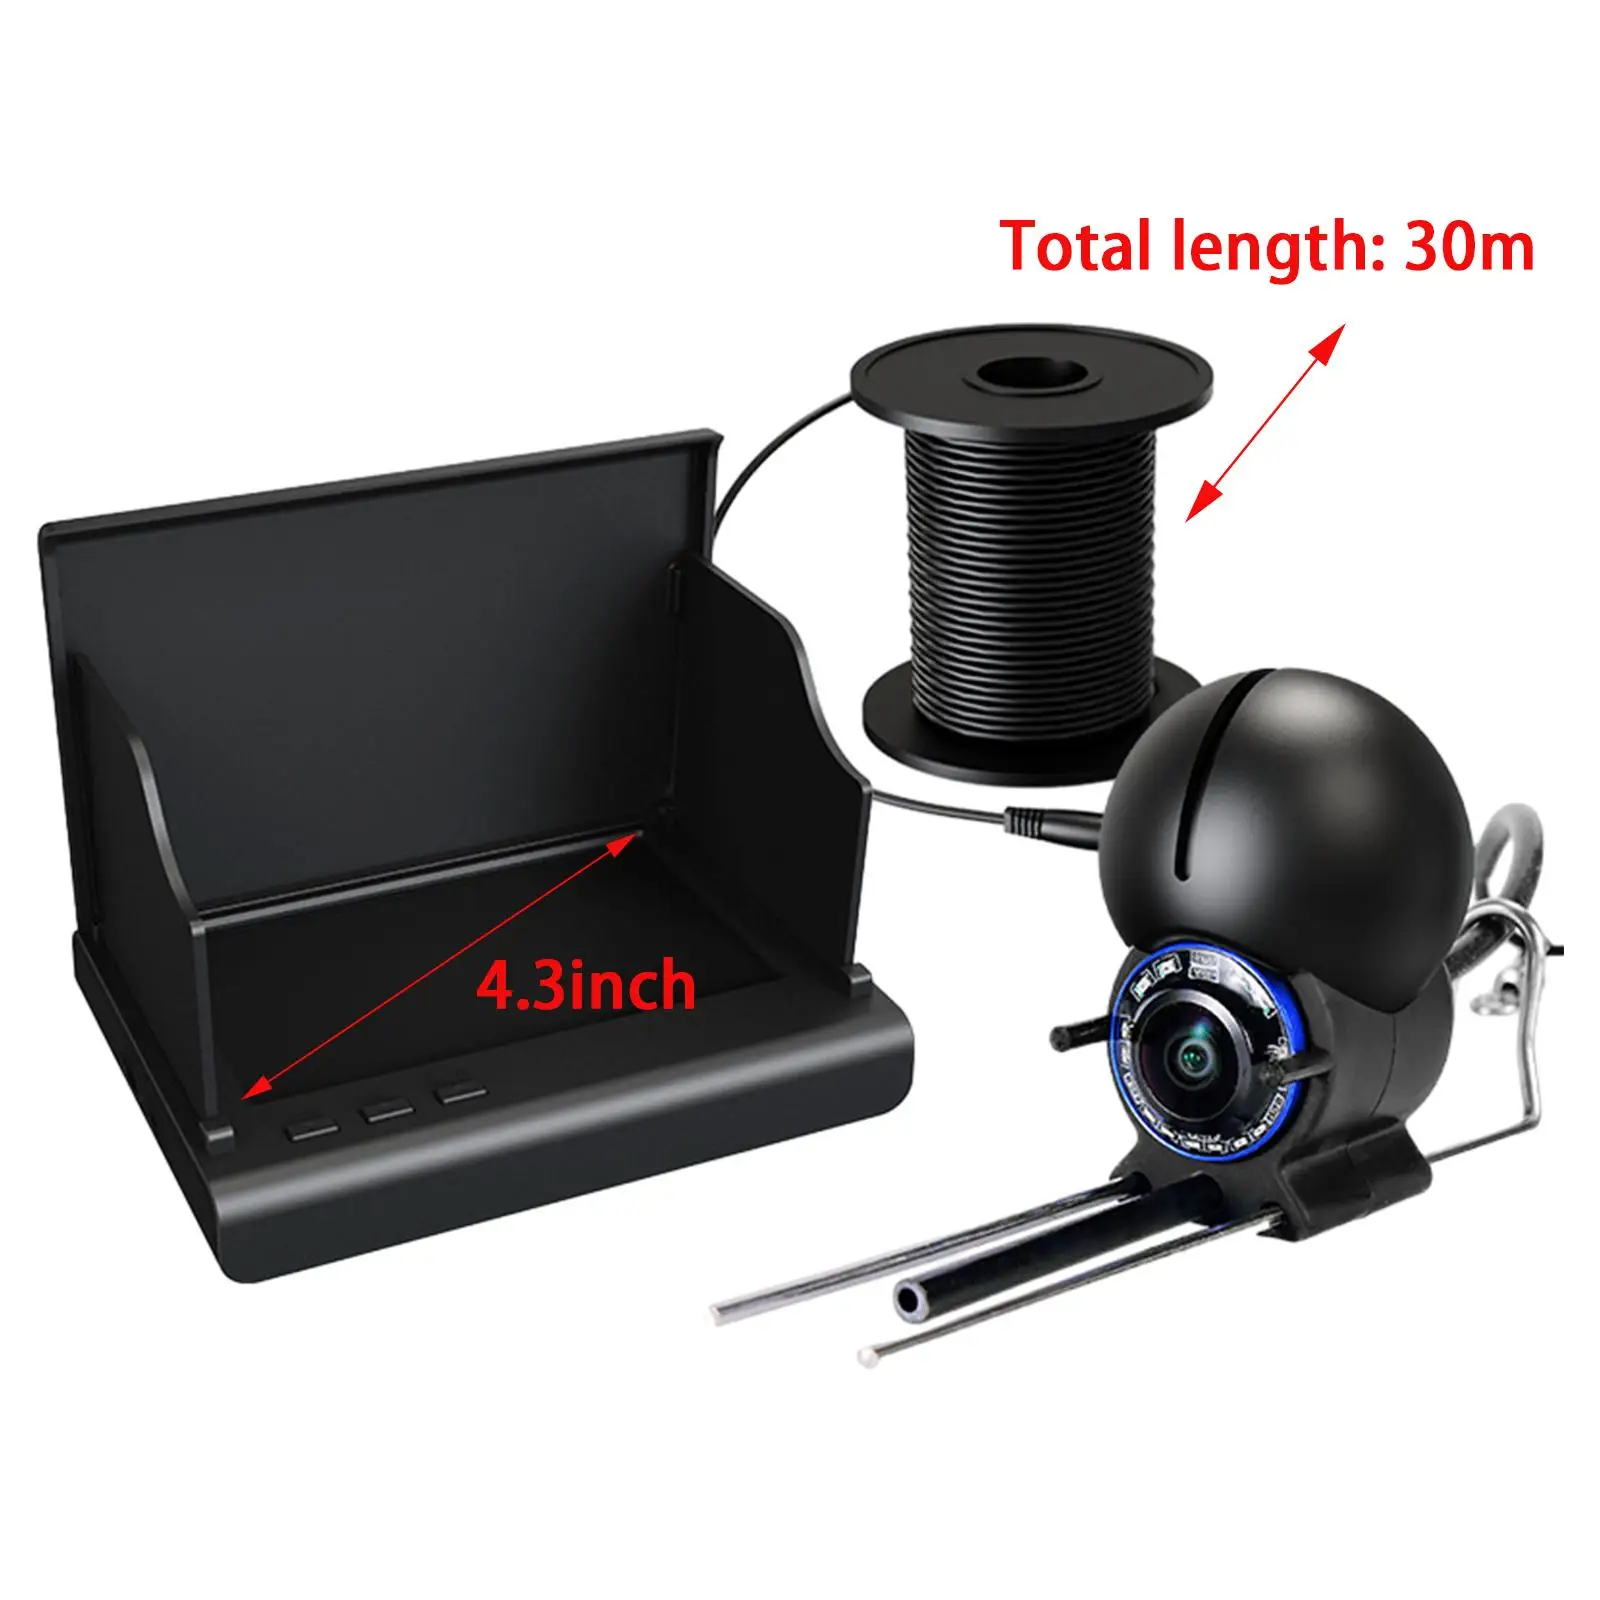 Fishing Finders Depth Finders Detection Fishing Gear Underwater Fishing Camera for Water Sports Boat Lake Open Water Ice Fishing